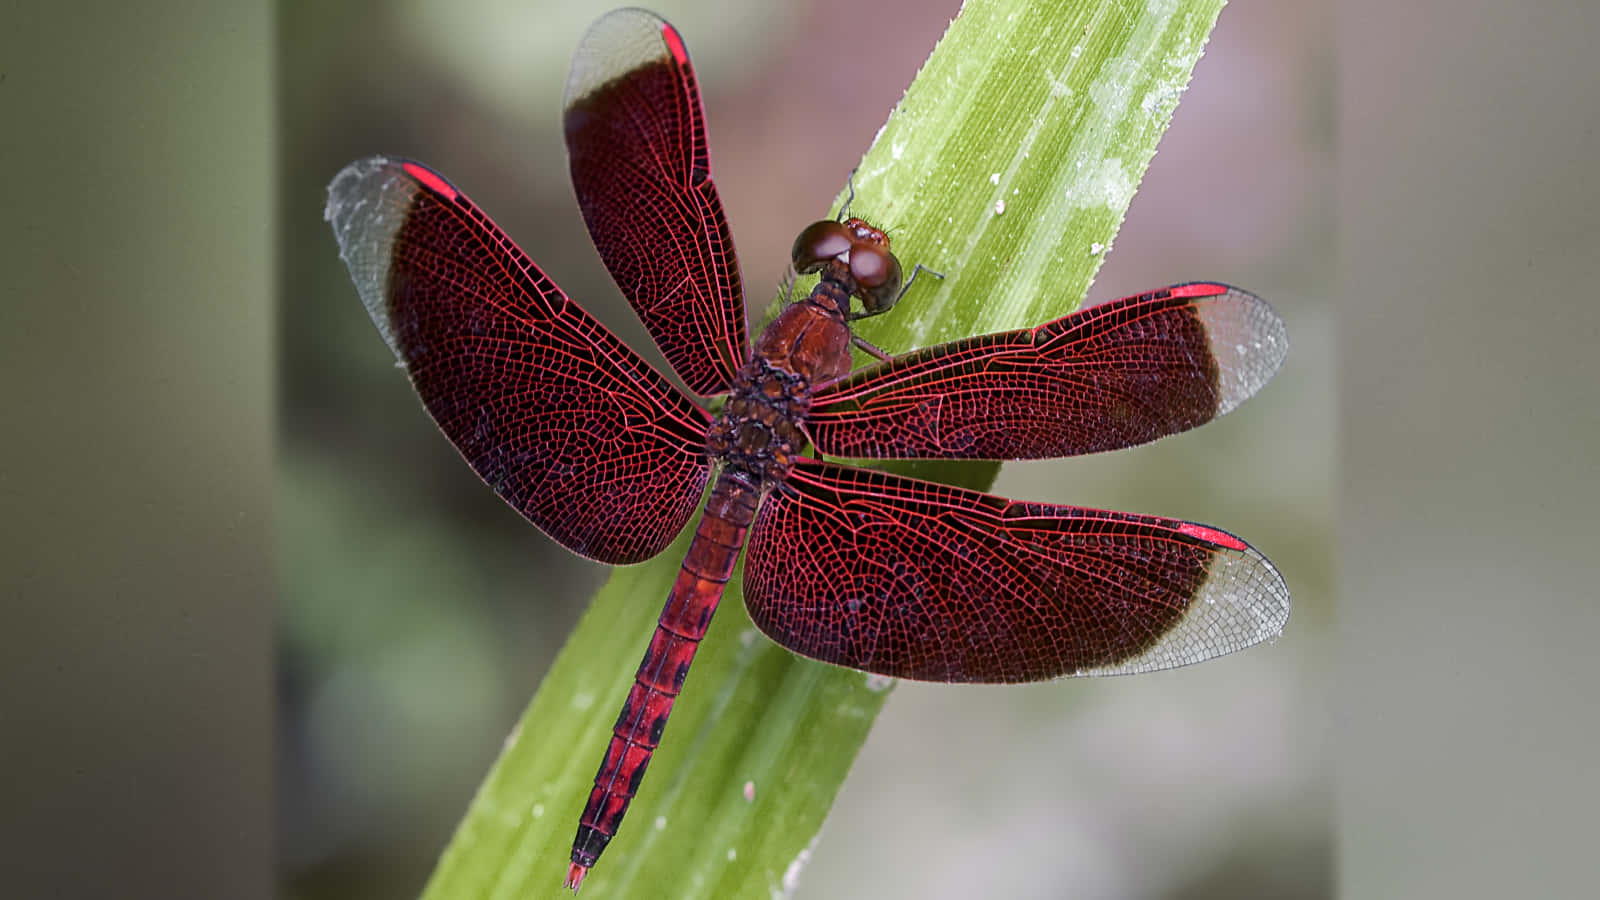 A Vibrant Red Dragonfly Perched on a Leaf Wallpaper